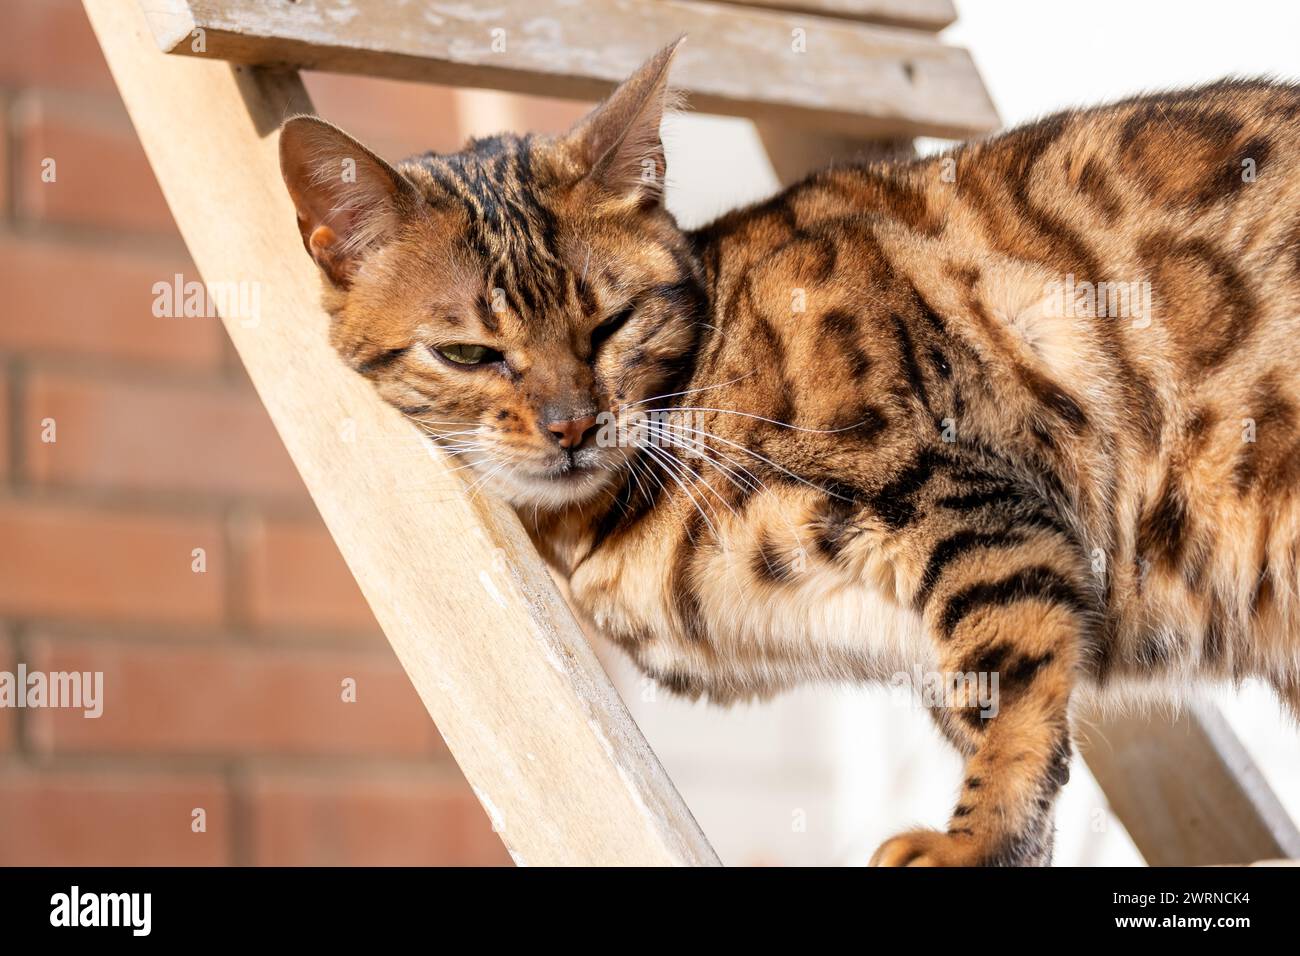 A majestic Bengal cat lounges lazily on a wooden structure, patterned coat gleaming in the sunlight, evoking a sense of casual luxury and the indulgen Stock Photo